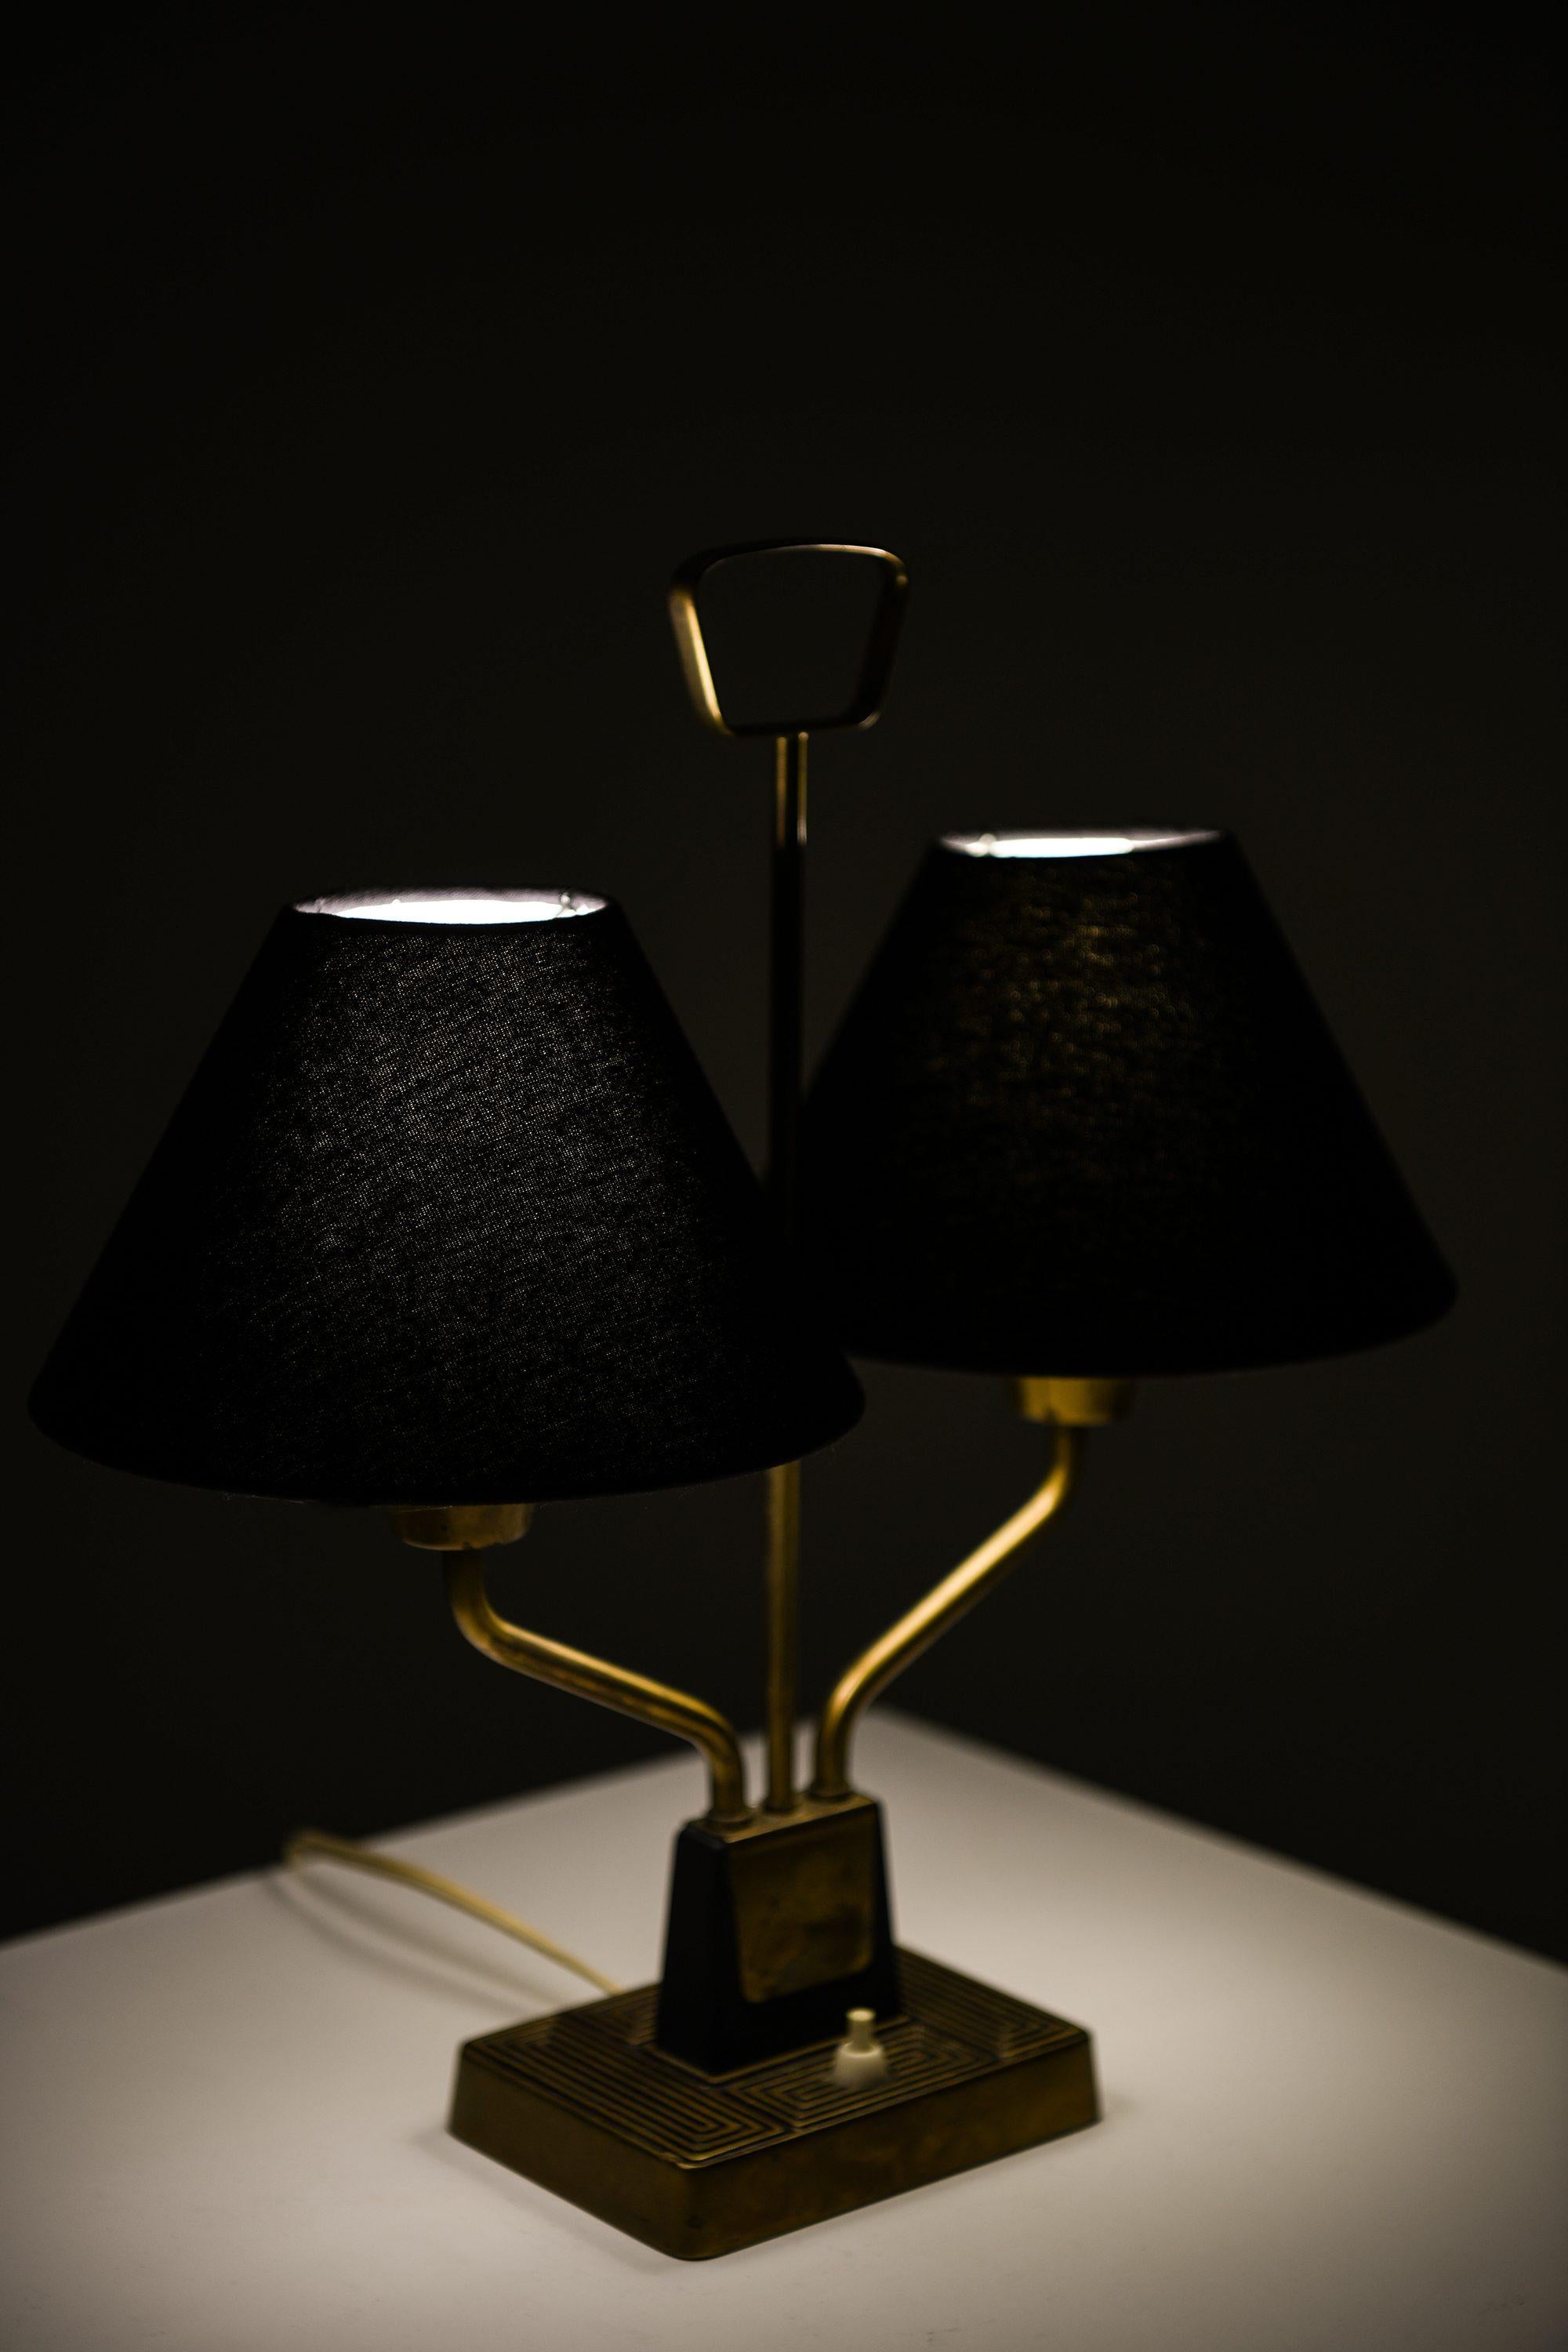 20th Century Table Lamp in Brass and Black Fabric Lamp Shades by Sonja Katzin, 1950's ASEA For Sale